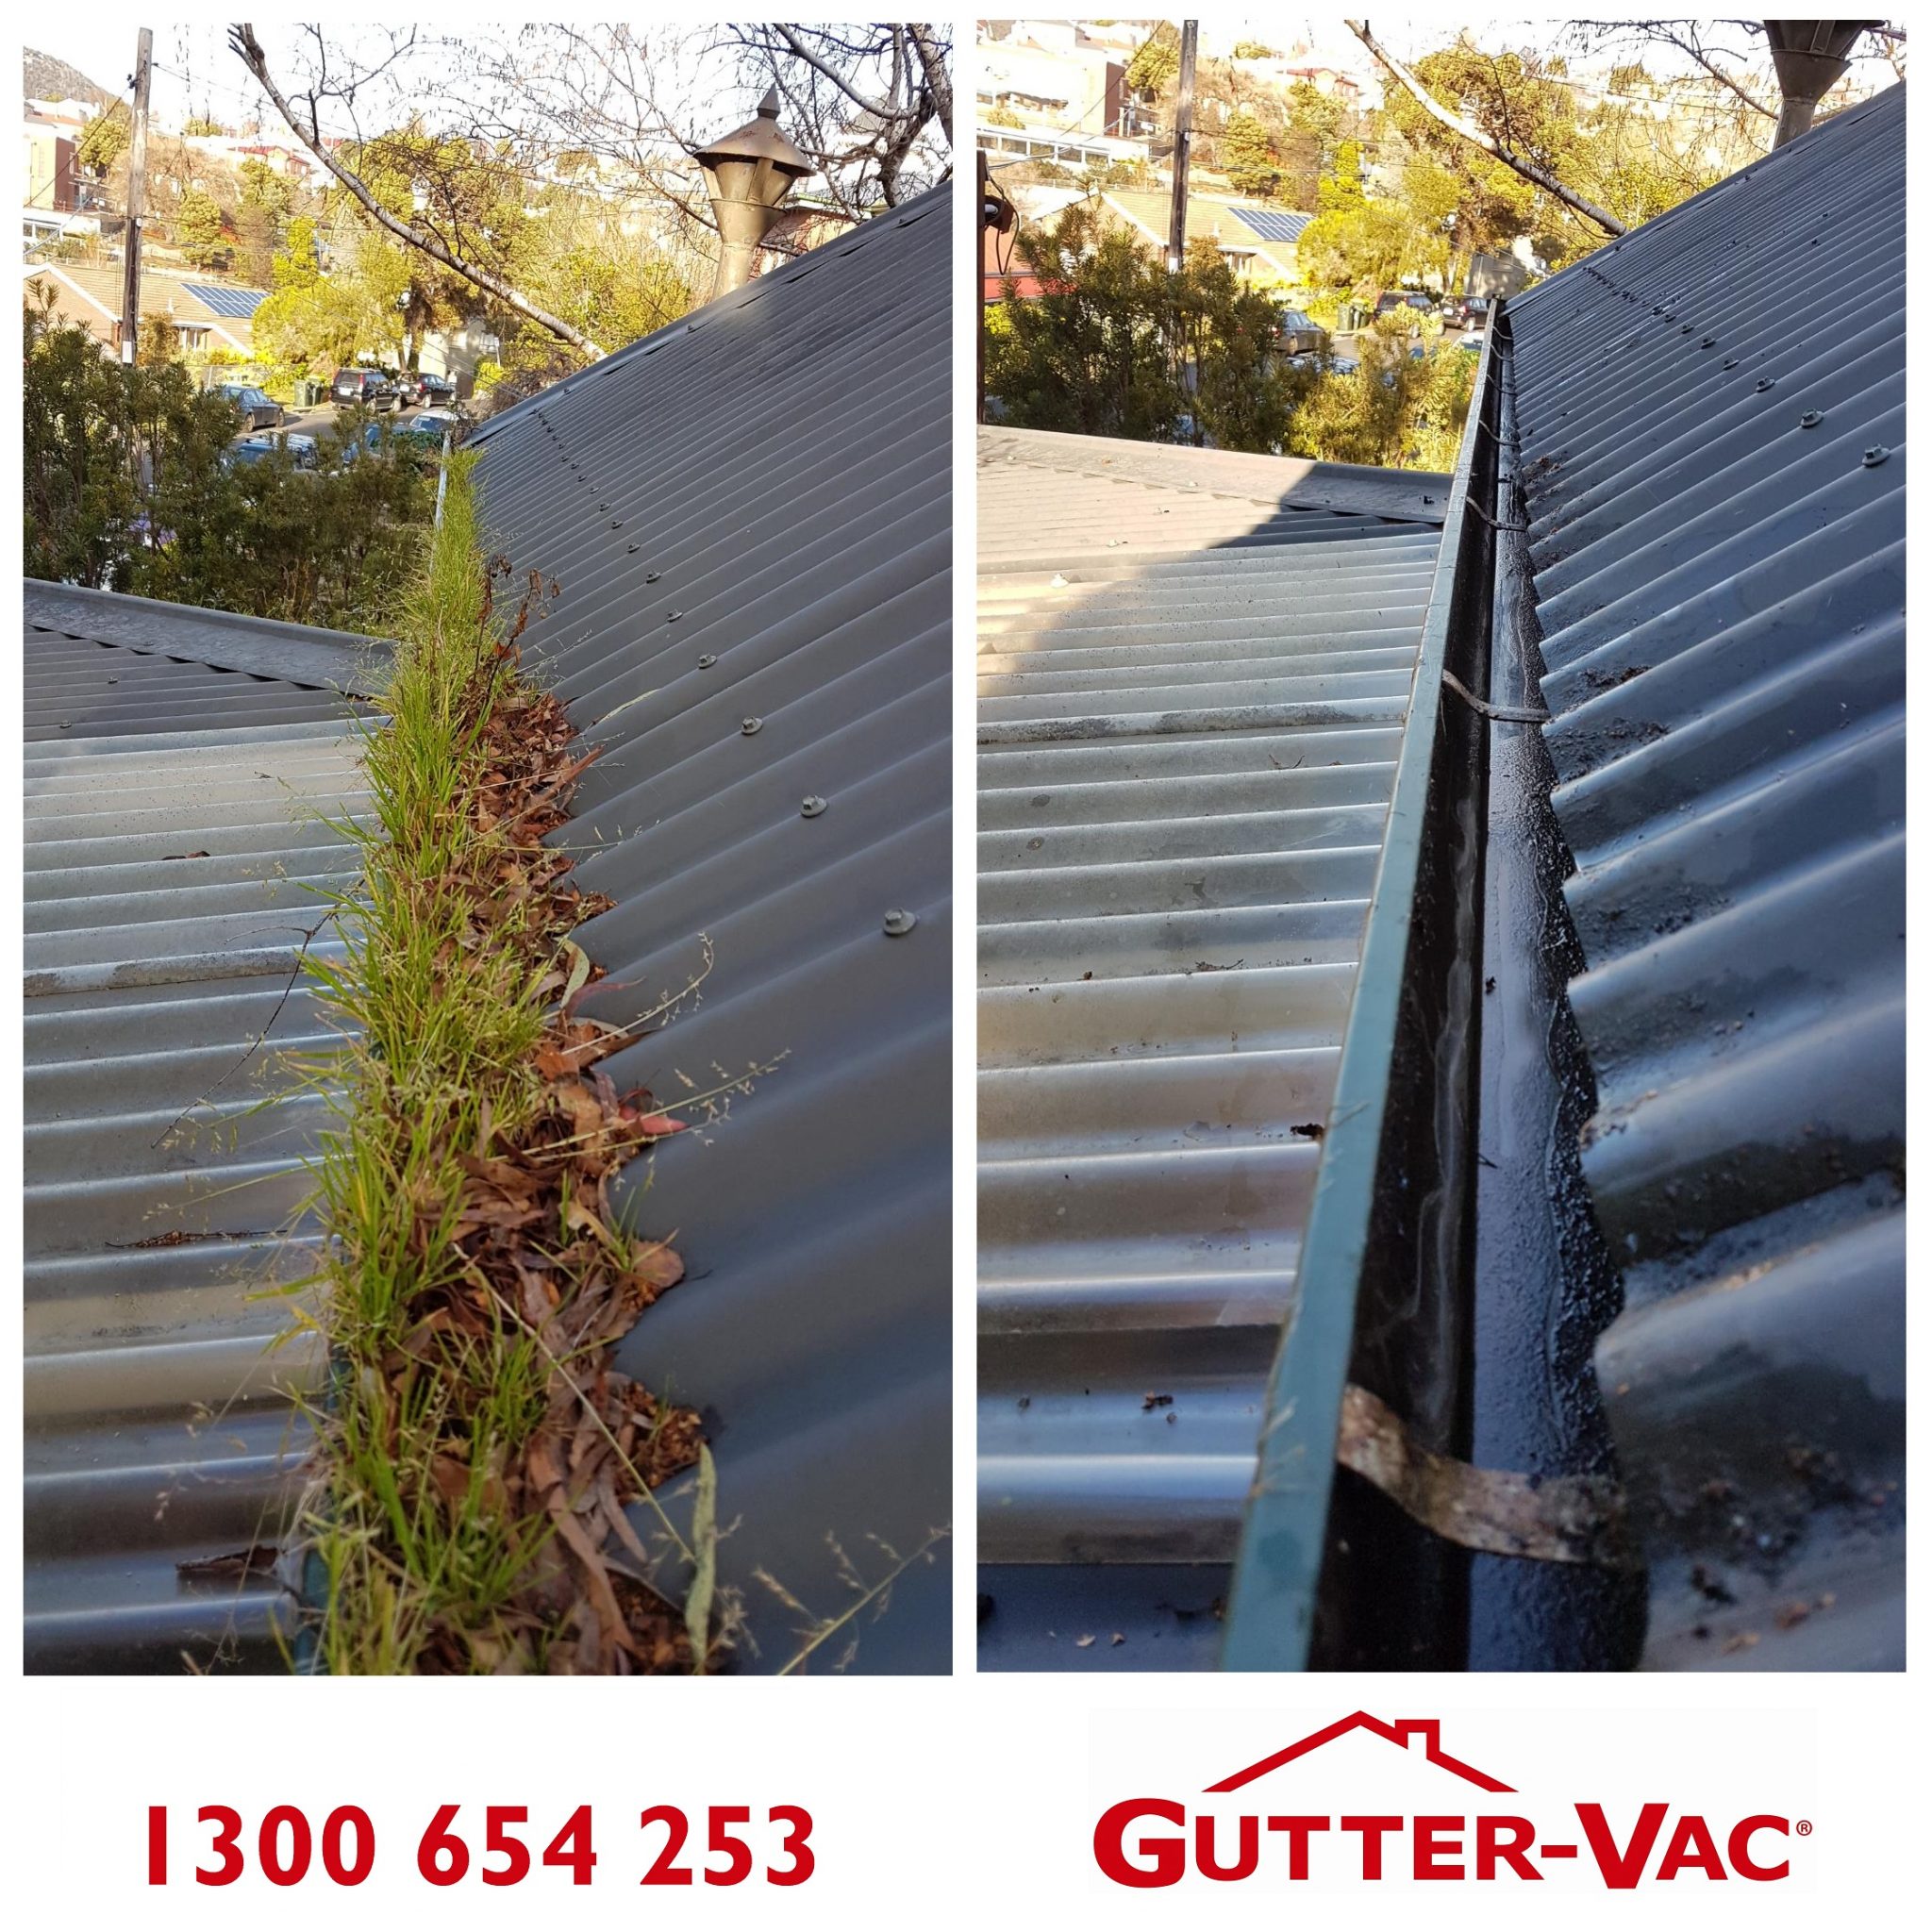 If Your Gutters Look Like This You Definitely Need A Gutter Clean